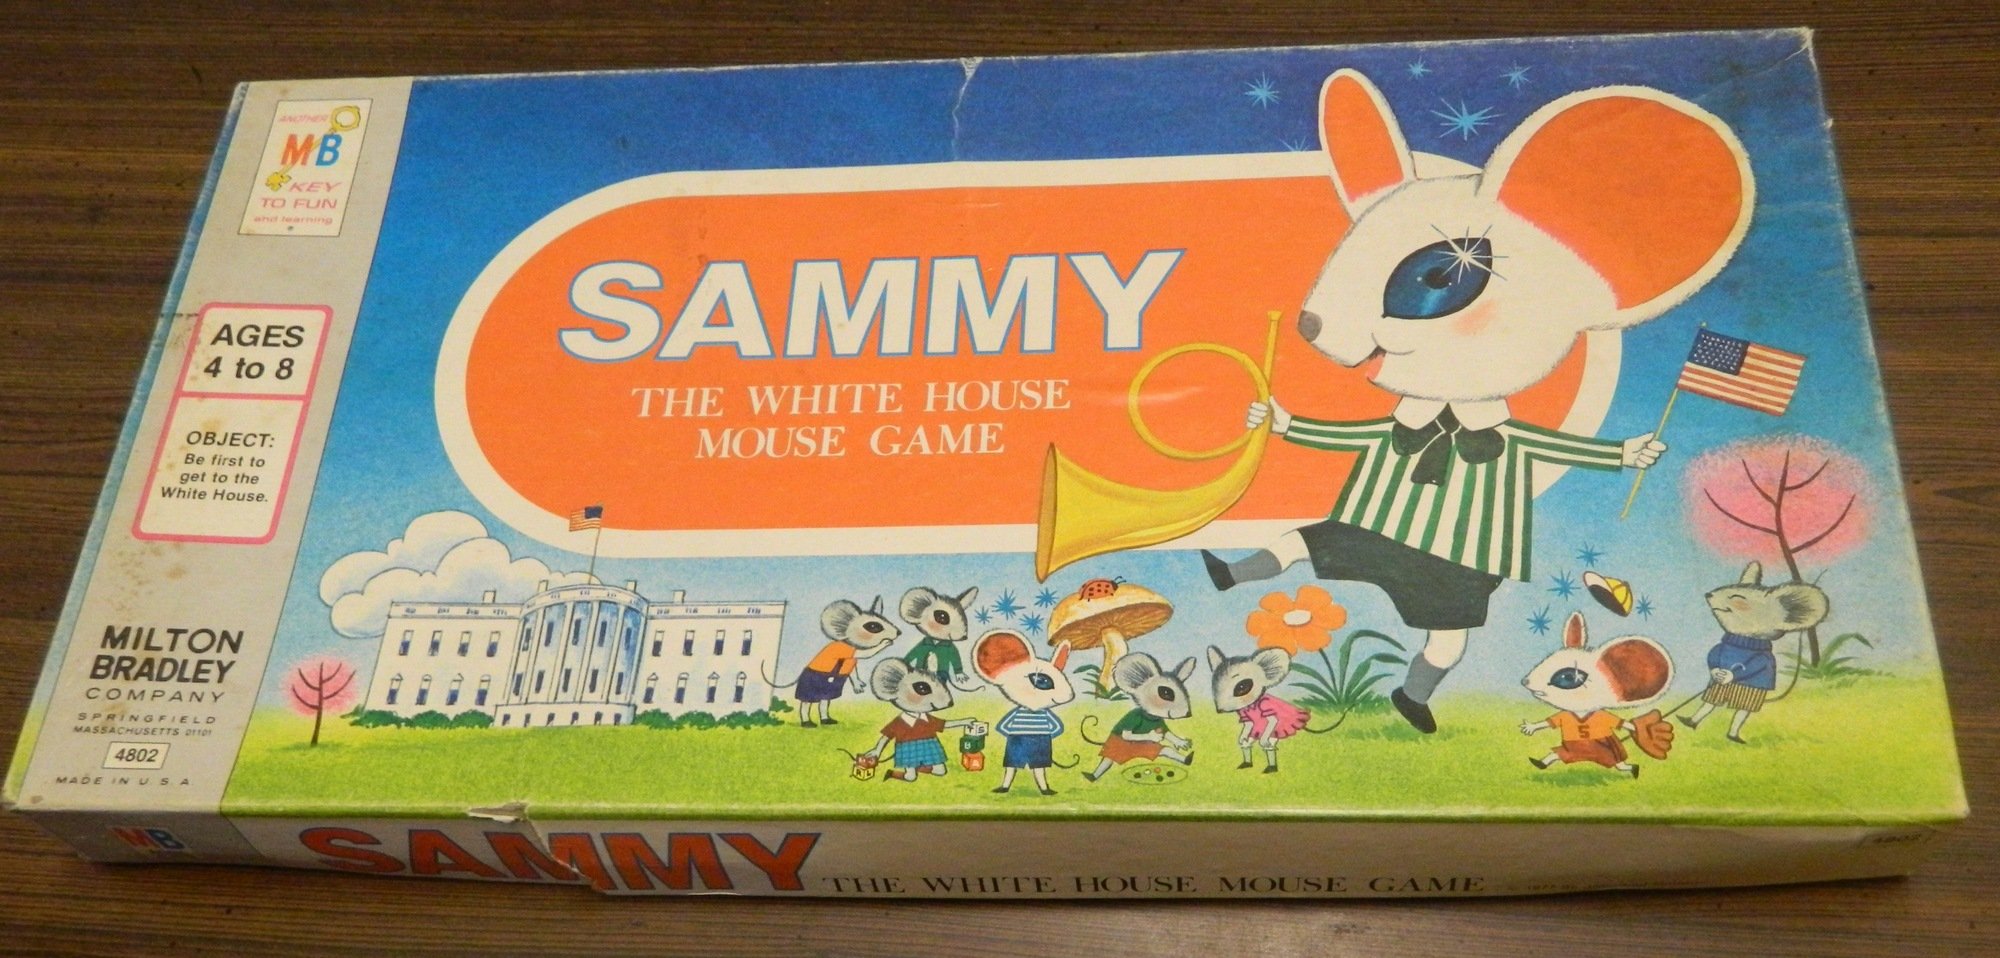 Sammy The White House Mouse Game Review and Rules